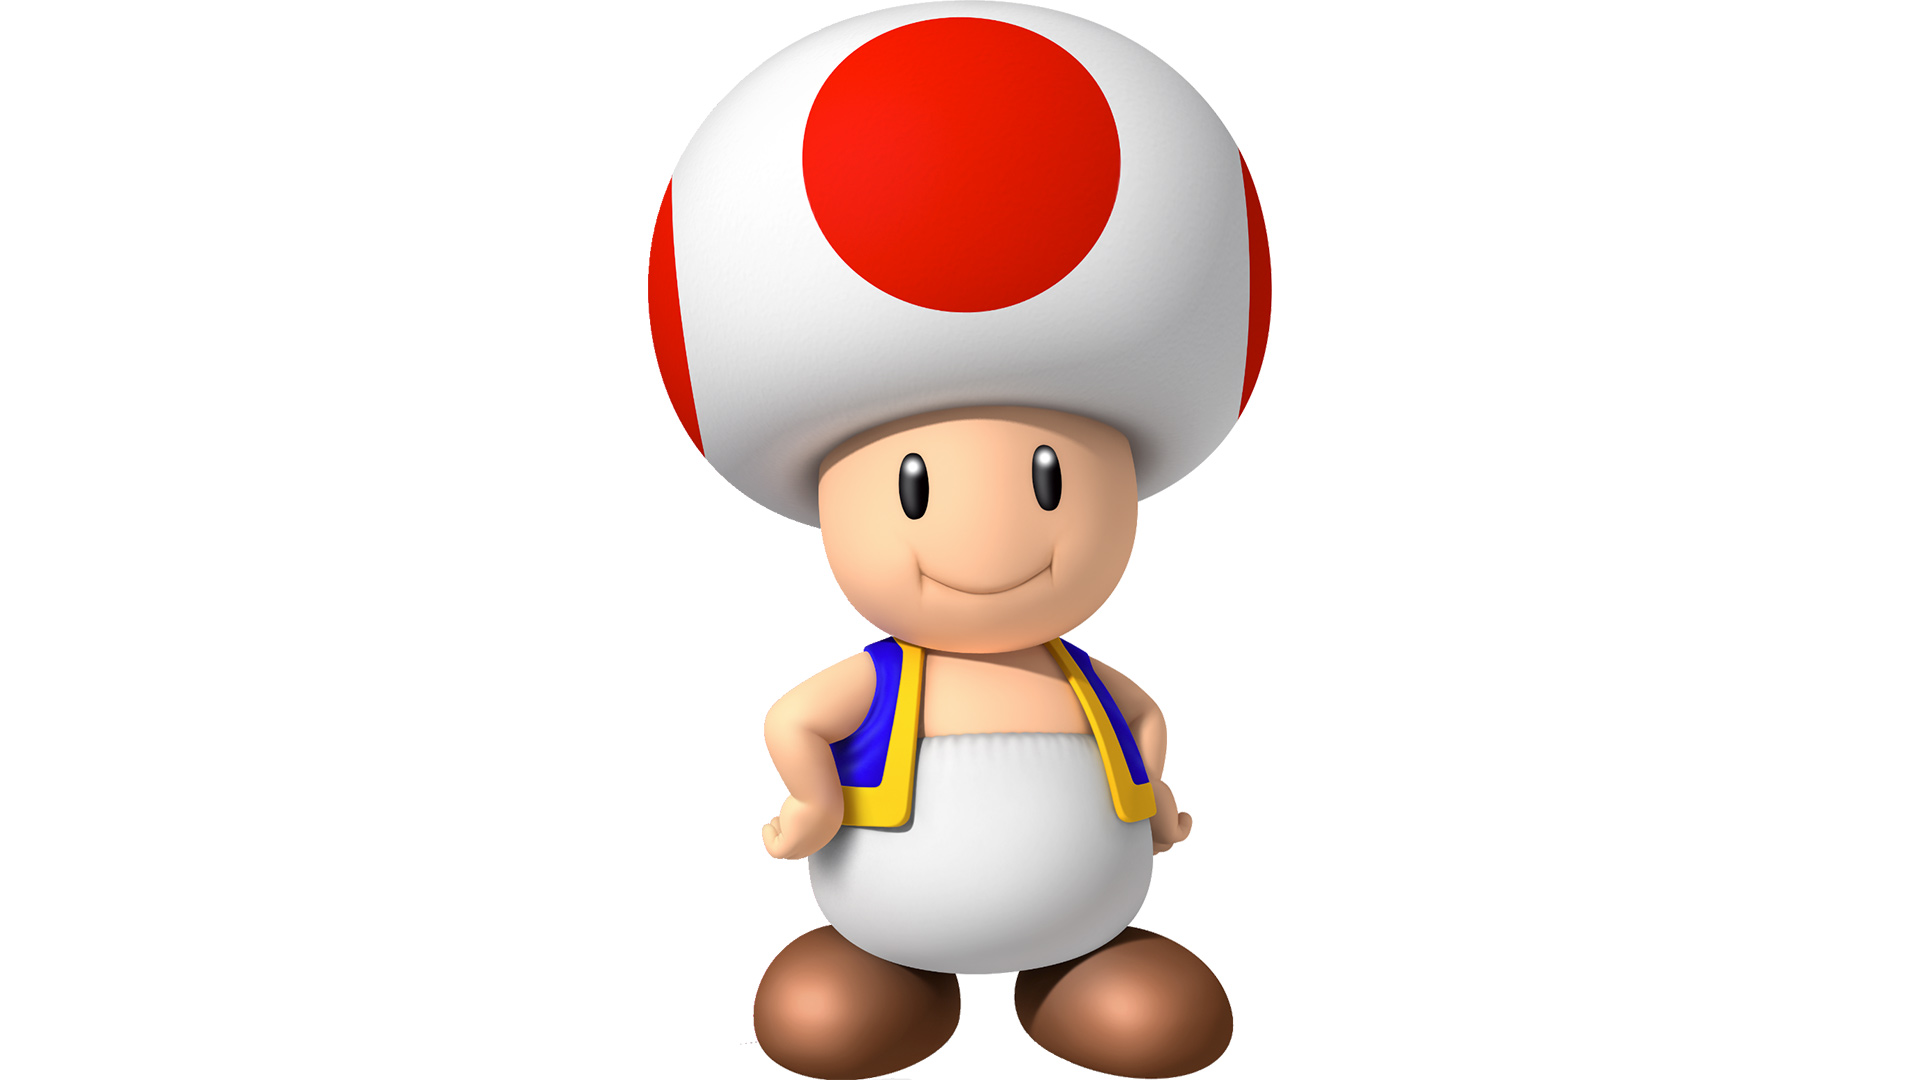 Toad isn't wearing a hat, Nintendo confirms